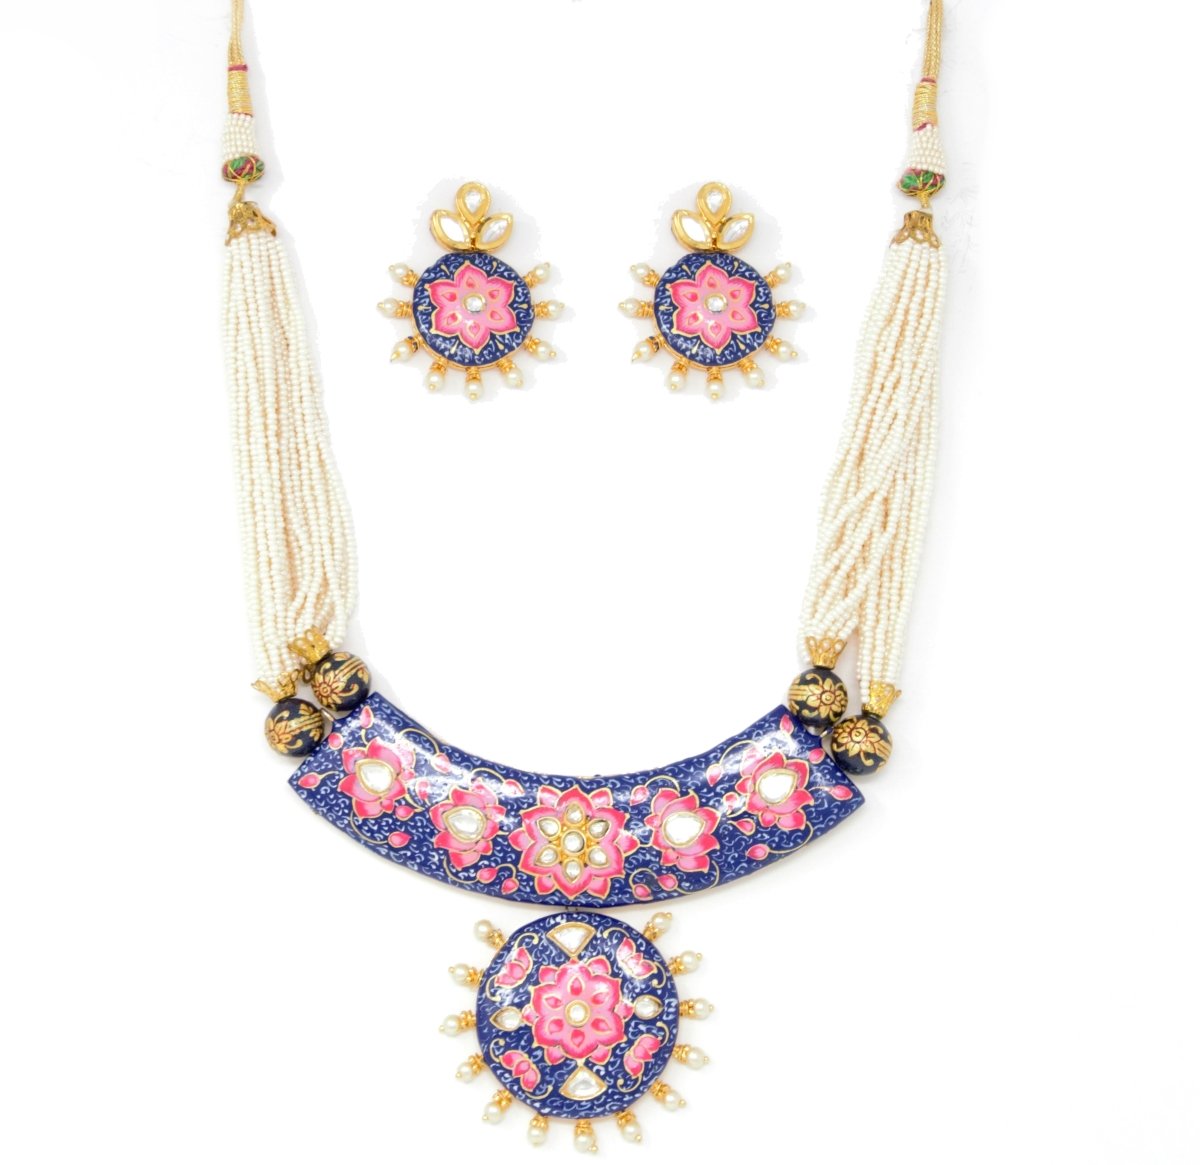 Blue Meenakari Gold Necklace Set Having Multi-layered Beads with Earrings